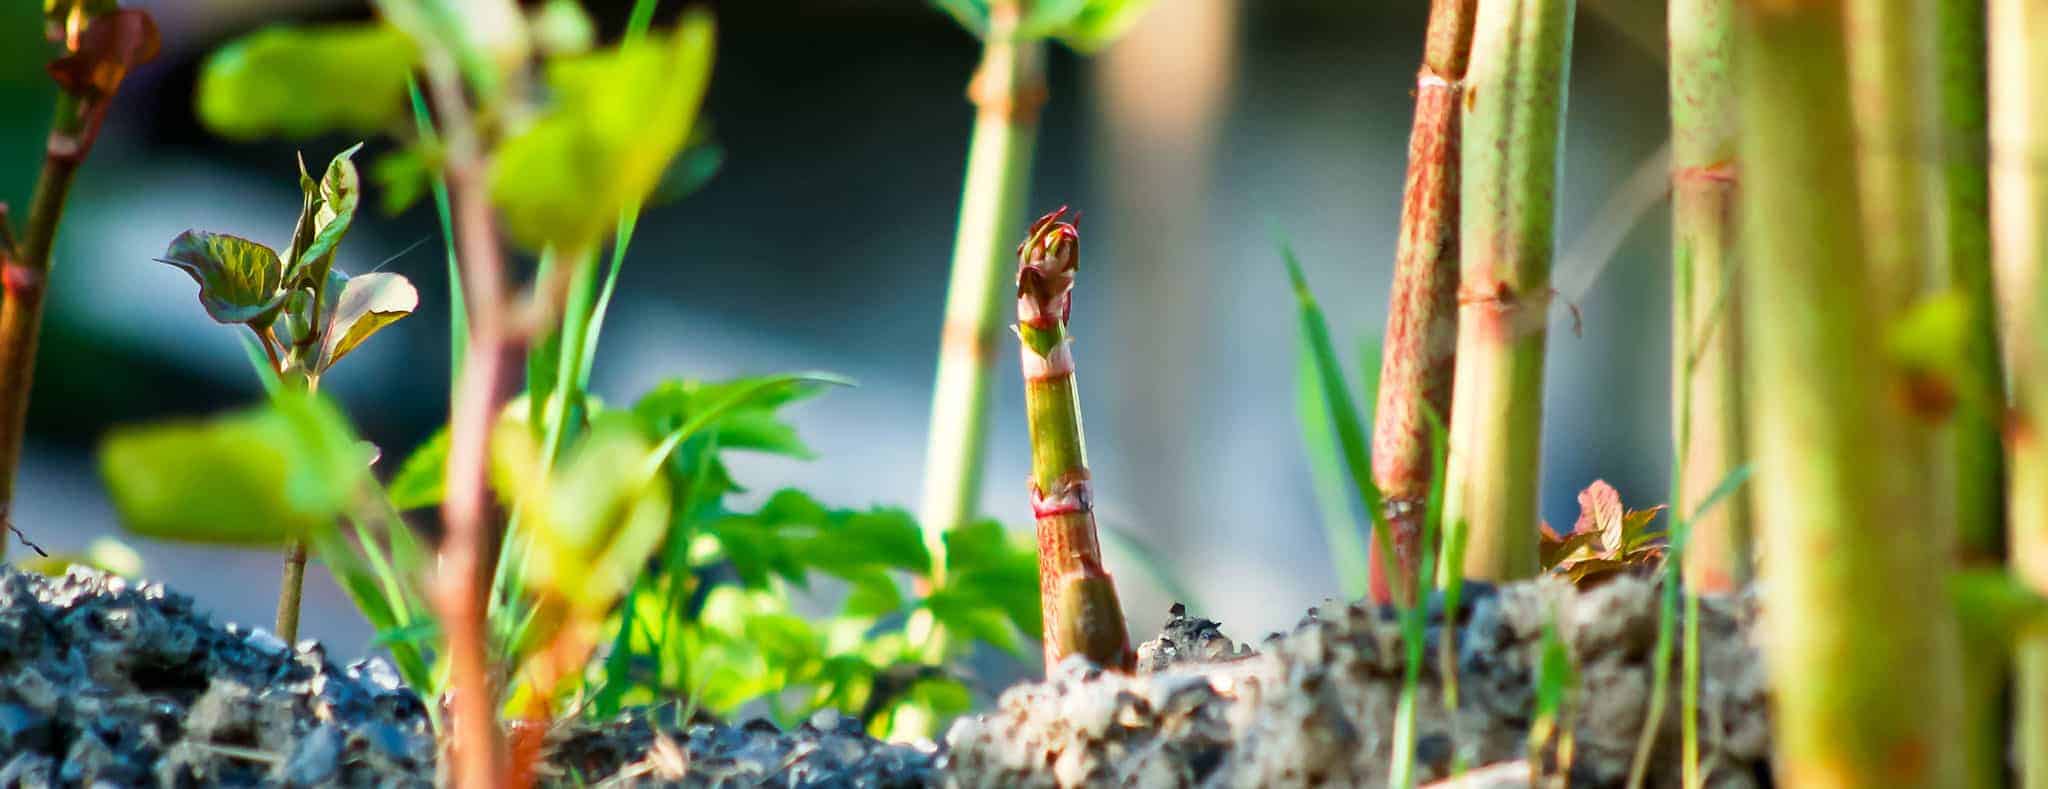 Is Japanese knotweed poisonous?